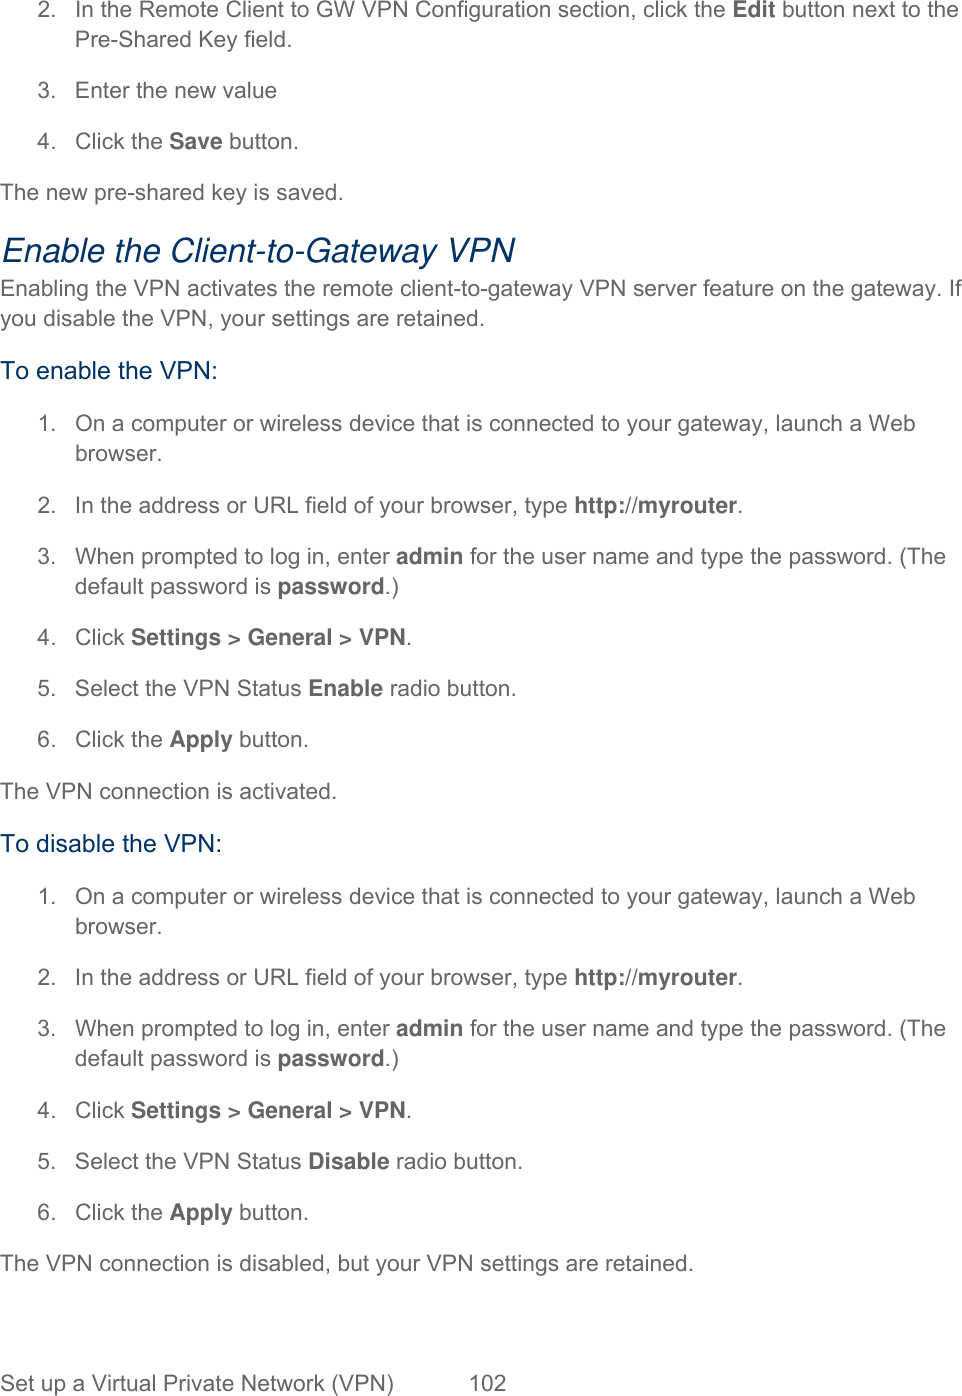 Set up a Virtual Private Network (VPN)  102   2.  In the Remote Client to GW VPN Configuration section, click the Edit button next to the Pre-Shared Key field. 3.  Enter the new value 4. Click the Save button. The new pre-shared key is saved. Enable the Client-to-Gateway VPN Enabling the VPN activates the remote client-to-gateway VPN server feature on the gateway. If you disable the VPN, your settings are retained. To enable the VPN: 1.  On a computer or wireless device that is connected to your gateway, launch a Web browser. 2.  In the address or URL field of your browser, type http://myrouter.  3.  When prompted to log in, enter admin for the user name and type the password. (The default password is password.) 4. Click Settings &gt; General &gt; VPN. 5.  Select the VPN Status Enable radio button. 6. Click the Apply button. The VPN connection is activated. To disable the VPN: 1.  On a computer or wireless device that is connected to your gateway, launch a Web browser. 2.  In the address or URL field of your browser, type http://myrouter.  3.  When prompted to log in, enter admin for the user name and type the password. (The default password is password.) 4. Click Settings &gt; General &gt; VPN. 5.  Select the VPN Status Disable radio button. 6. Click the Apply button. The VPN connection is disabled, but your VPN settings are retained. 